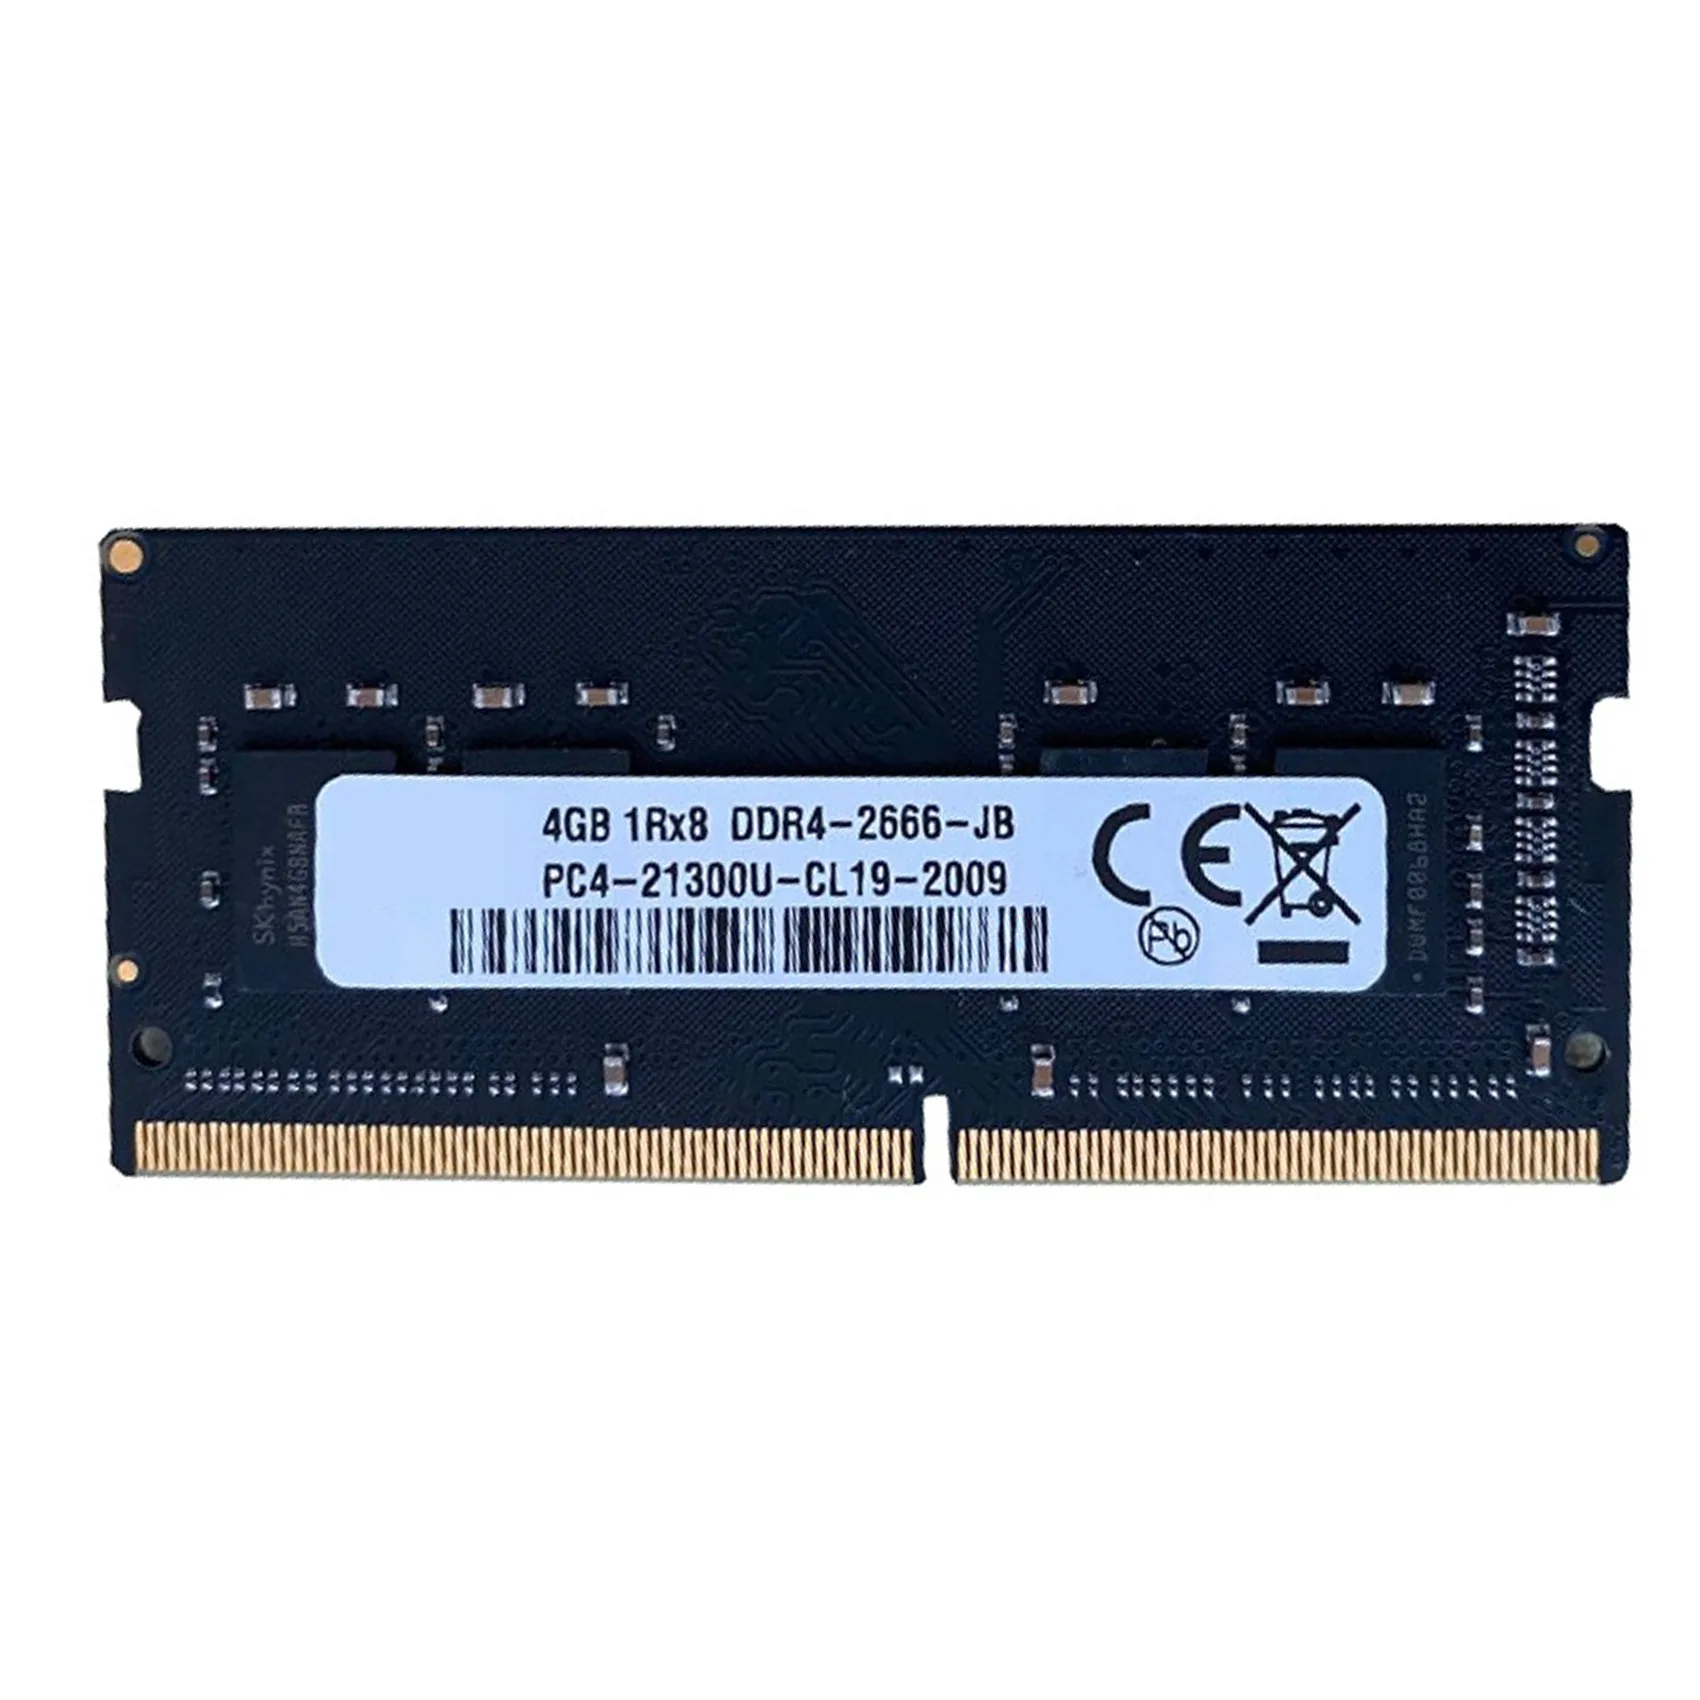 

DDR4 4GB Laptop Ram Memory 2666MHz PC4-21300 SODIMM Support Dual Channel for Intel AMD Laptop Memory